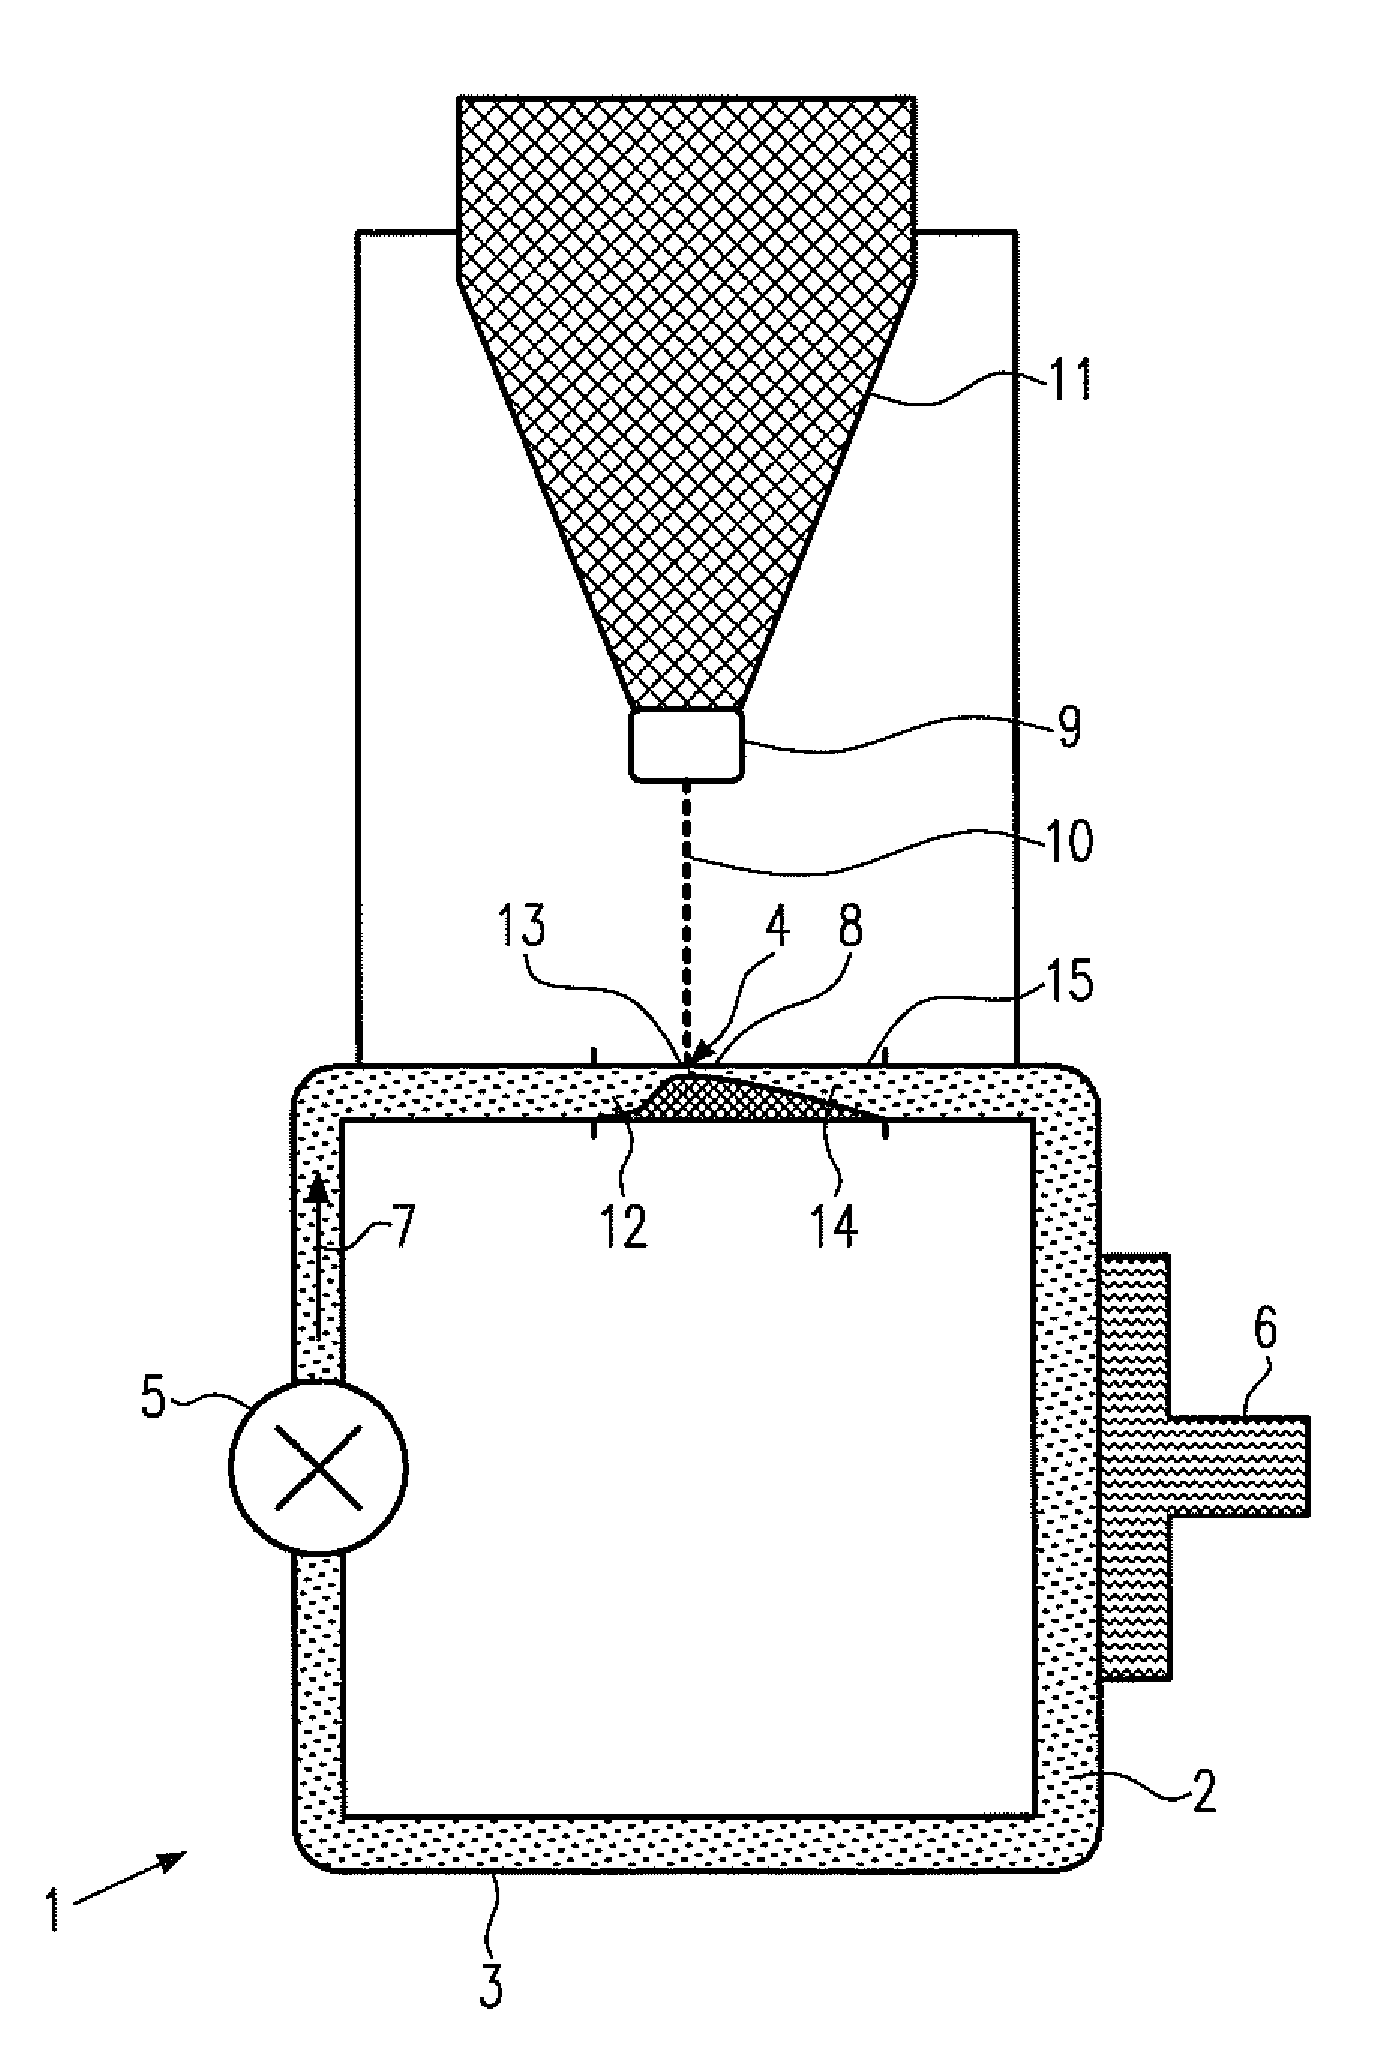 X-ray emitter, liquid-metal anode for an x-ray source and method for operating a magnetohydrodynamic pump for the same